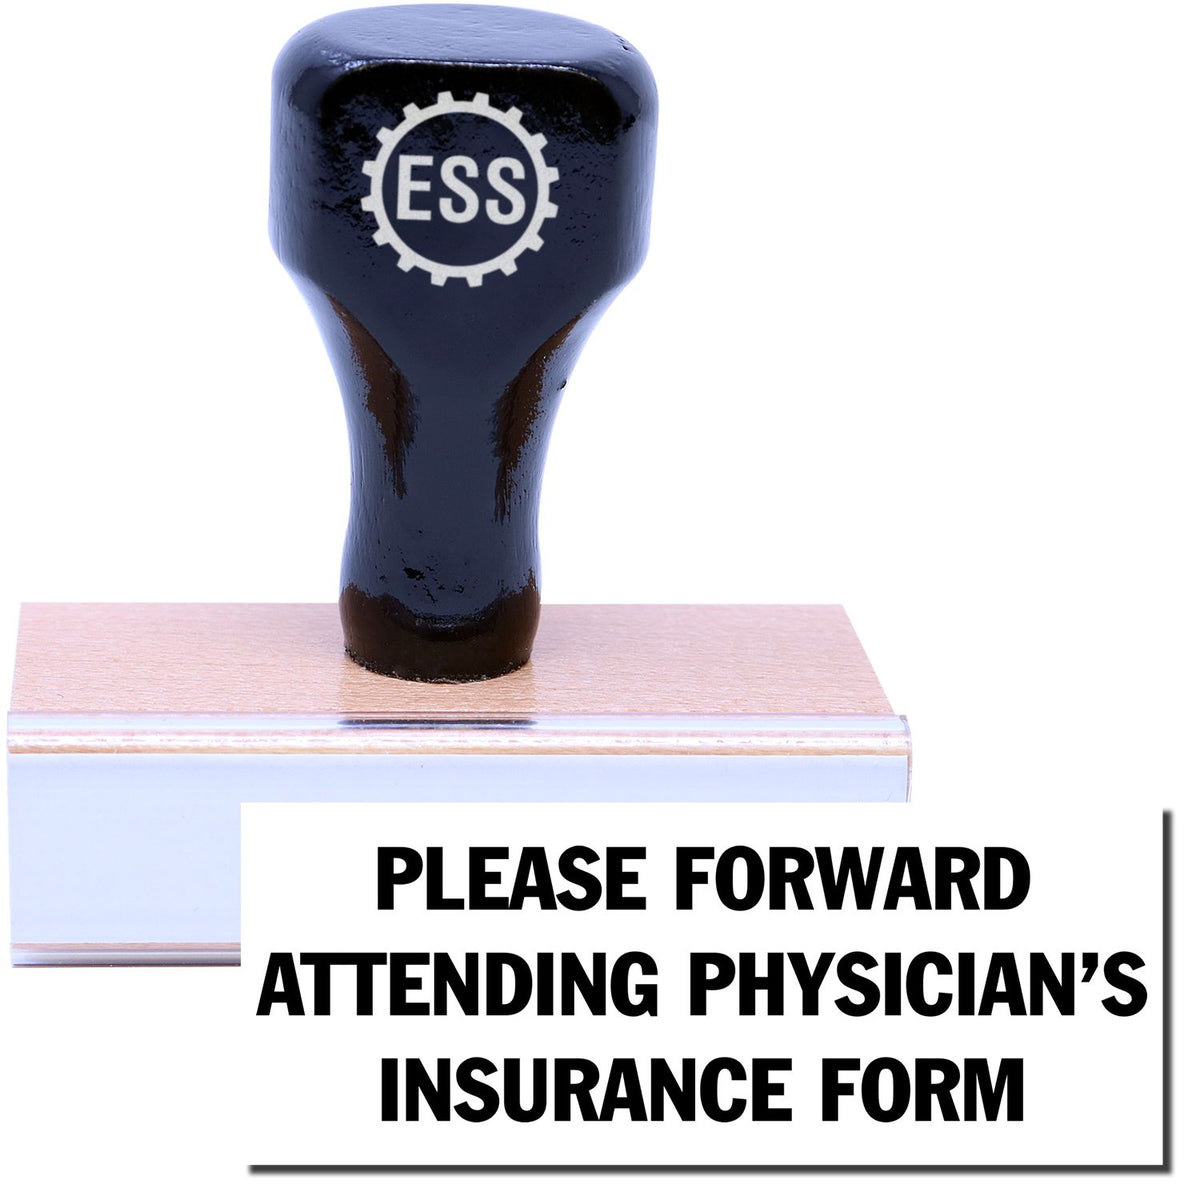 A stock office rubber stamp with a stamped image showing how the text &quot;PLEASE FORWARD ATTENDING PHYSICIAN&#39;S INSURANCE FORM&quot; in a large font is displayed after stamping.